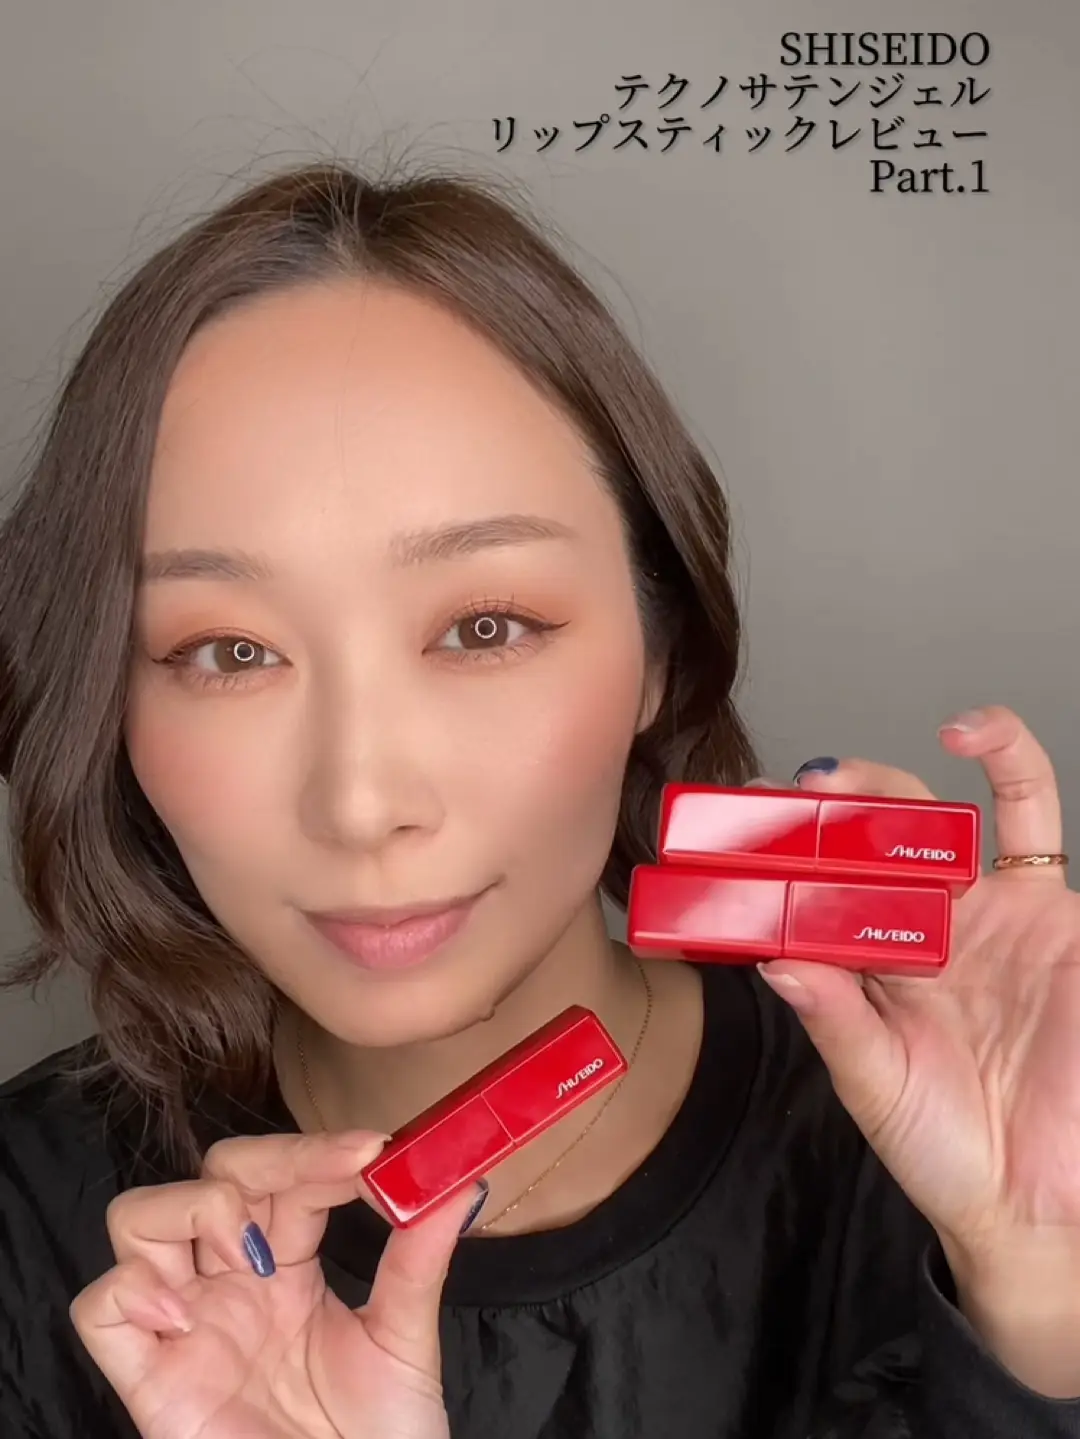 🫦 lips published of ぽか Lemon8 | by adults SHISEIDO Video | new review ♡ elegant